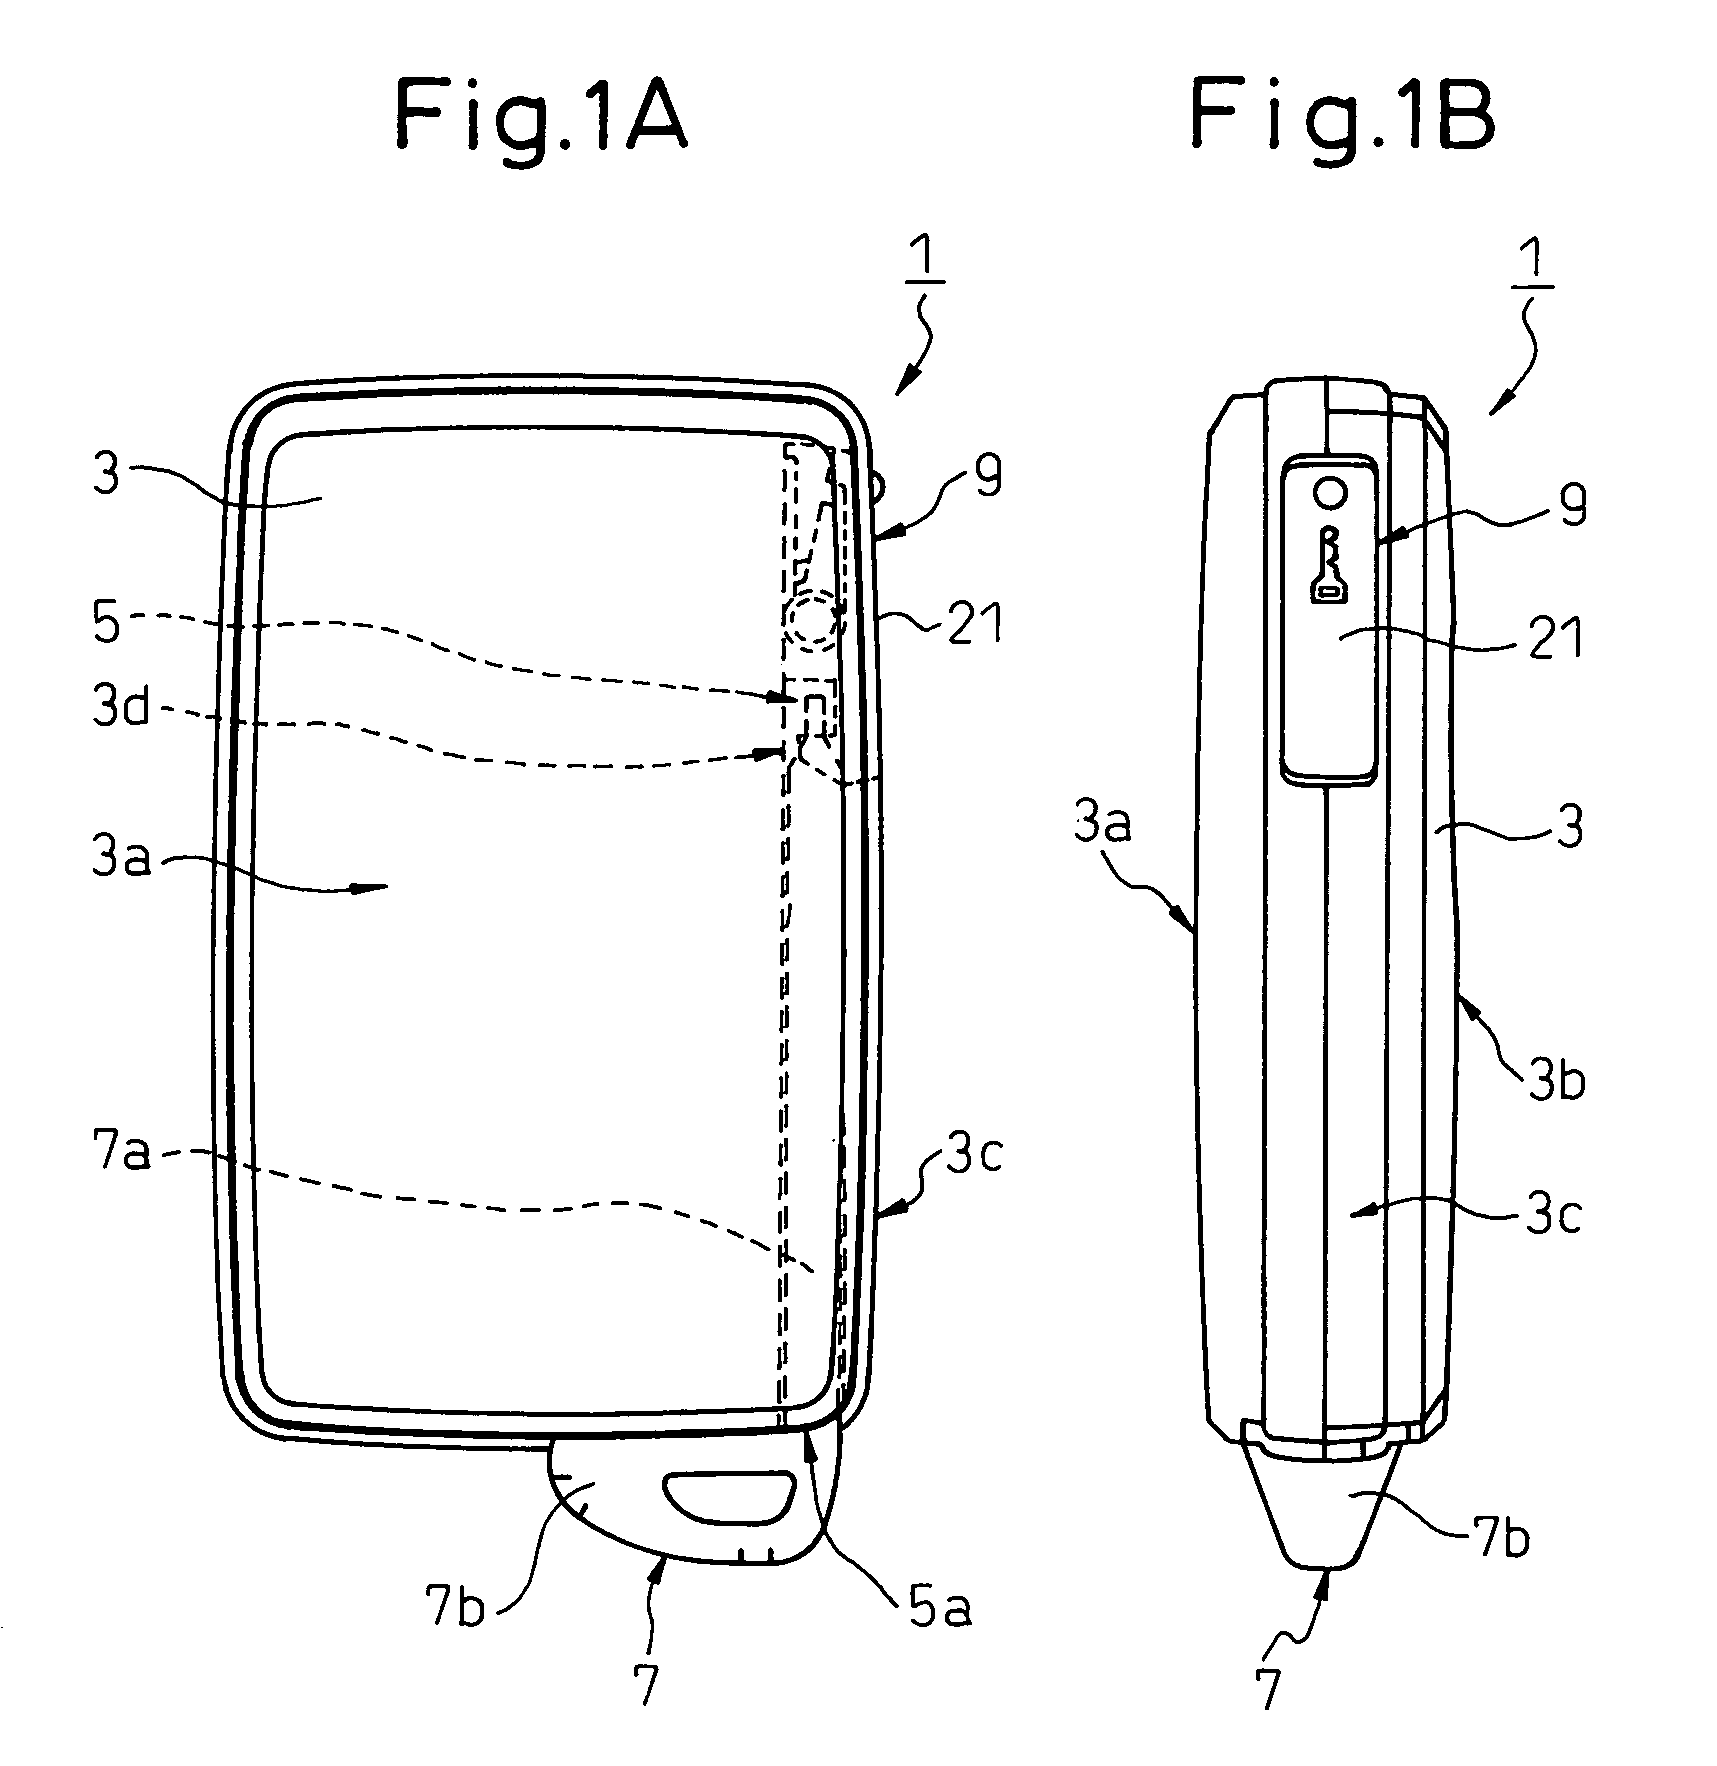 Portable device for electronic key system